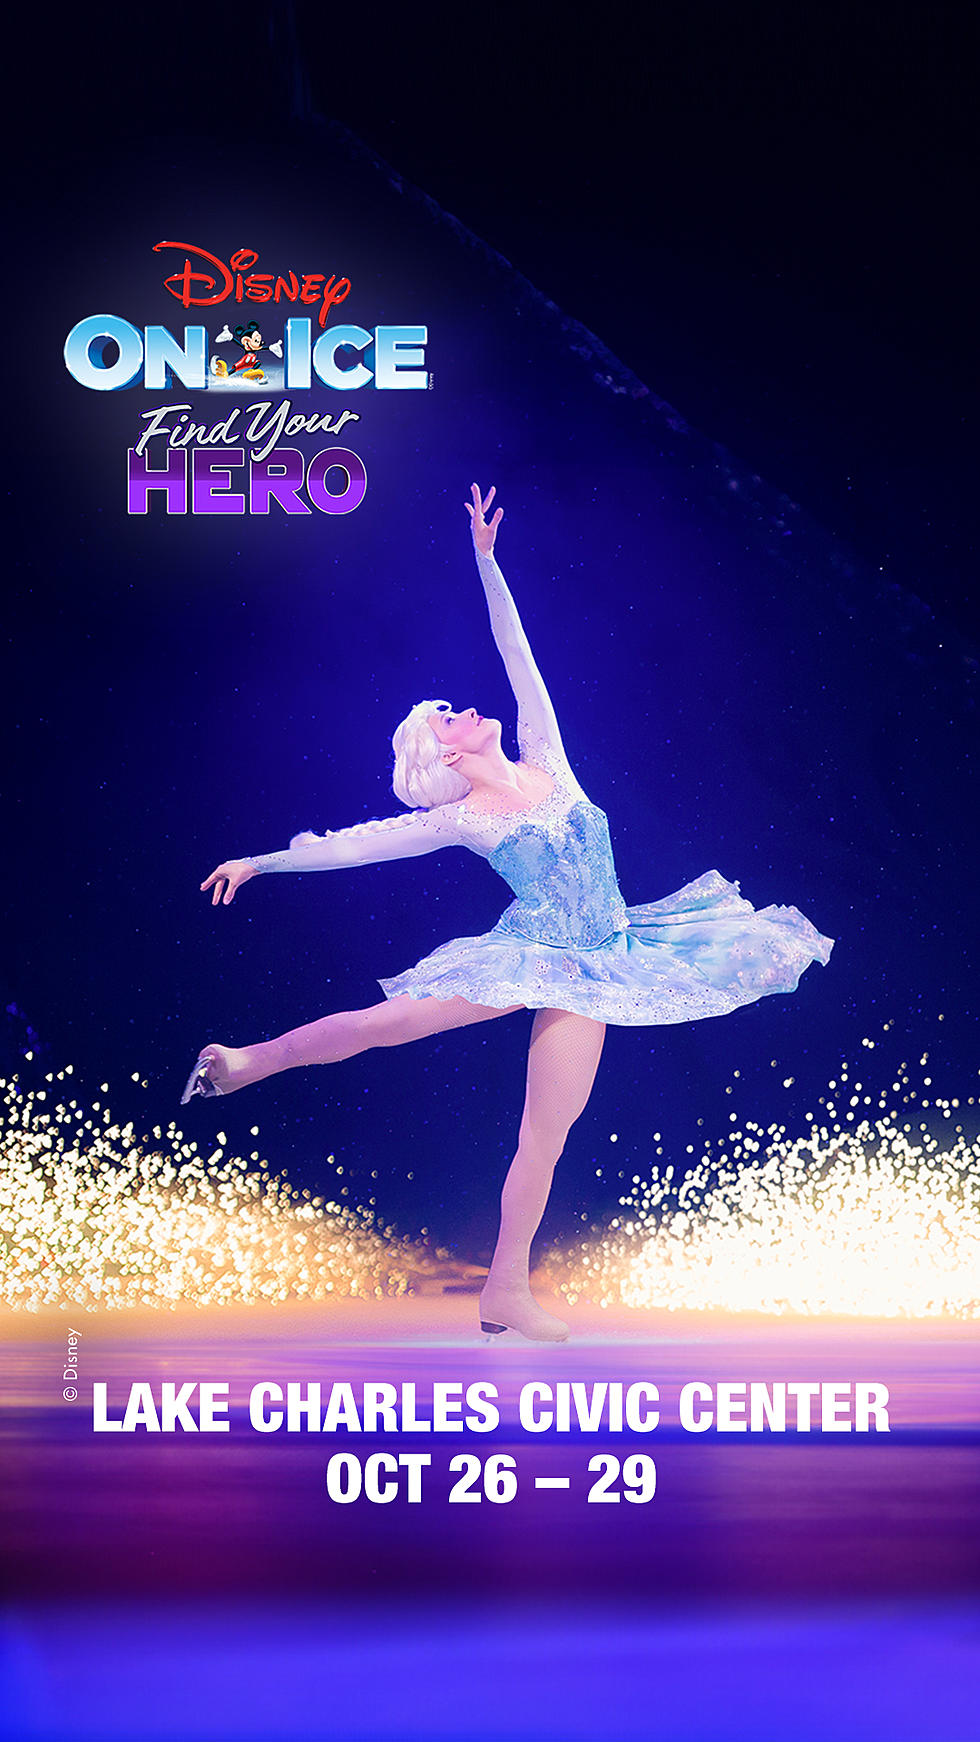 Disney On Ice Presents 'Find Your Hero' Live In Lake Charles